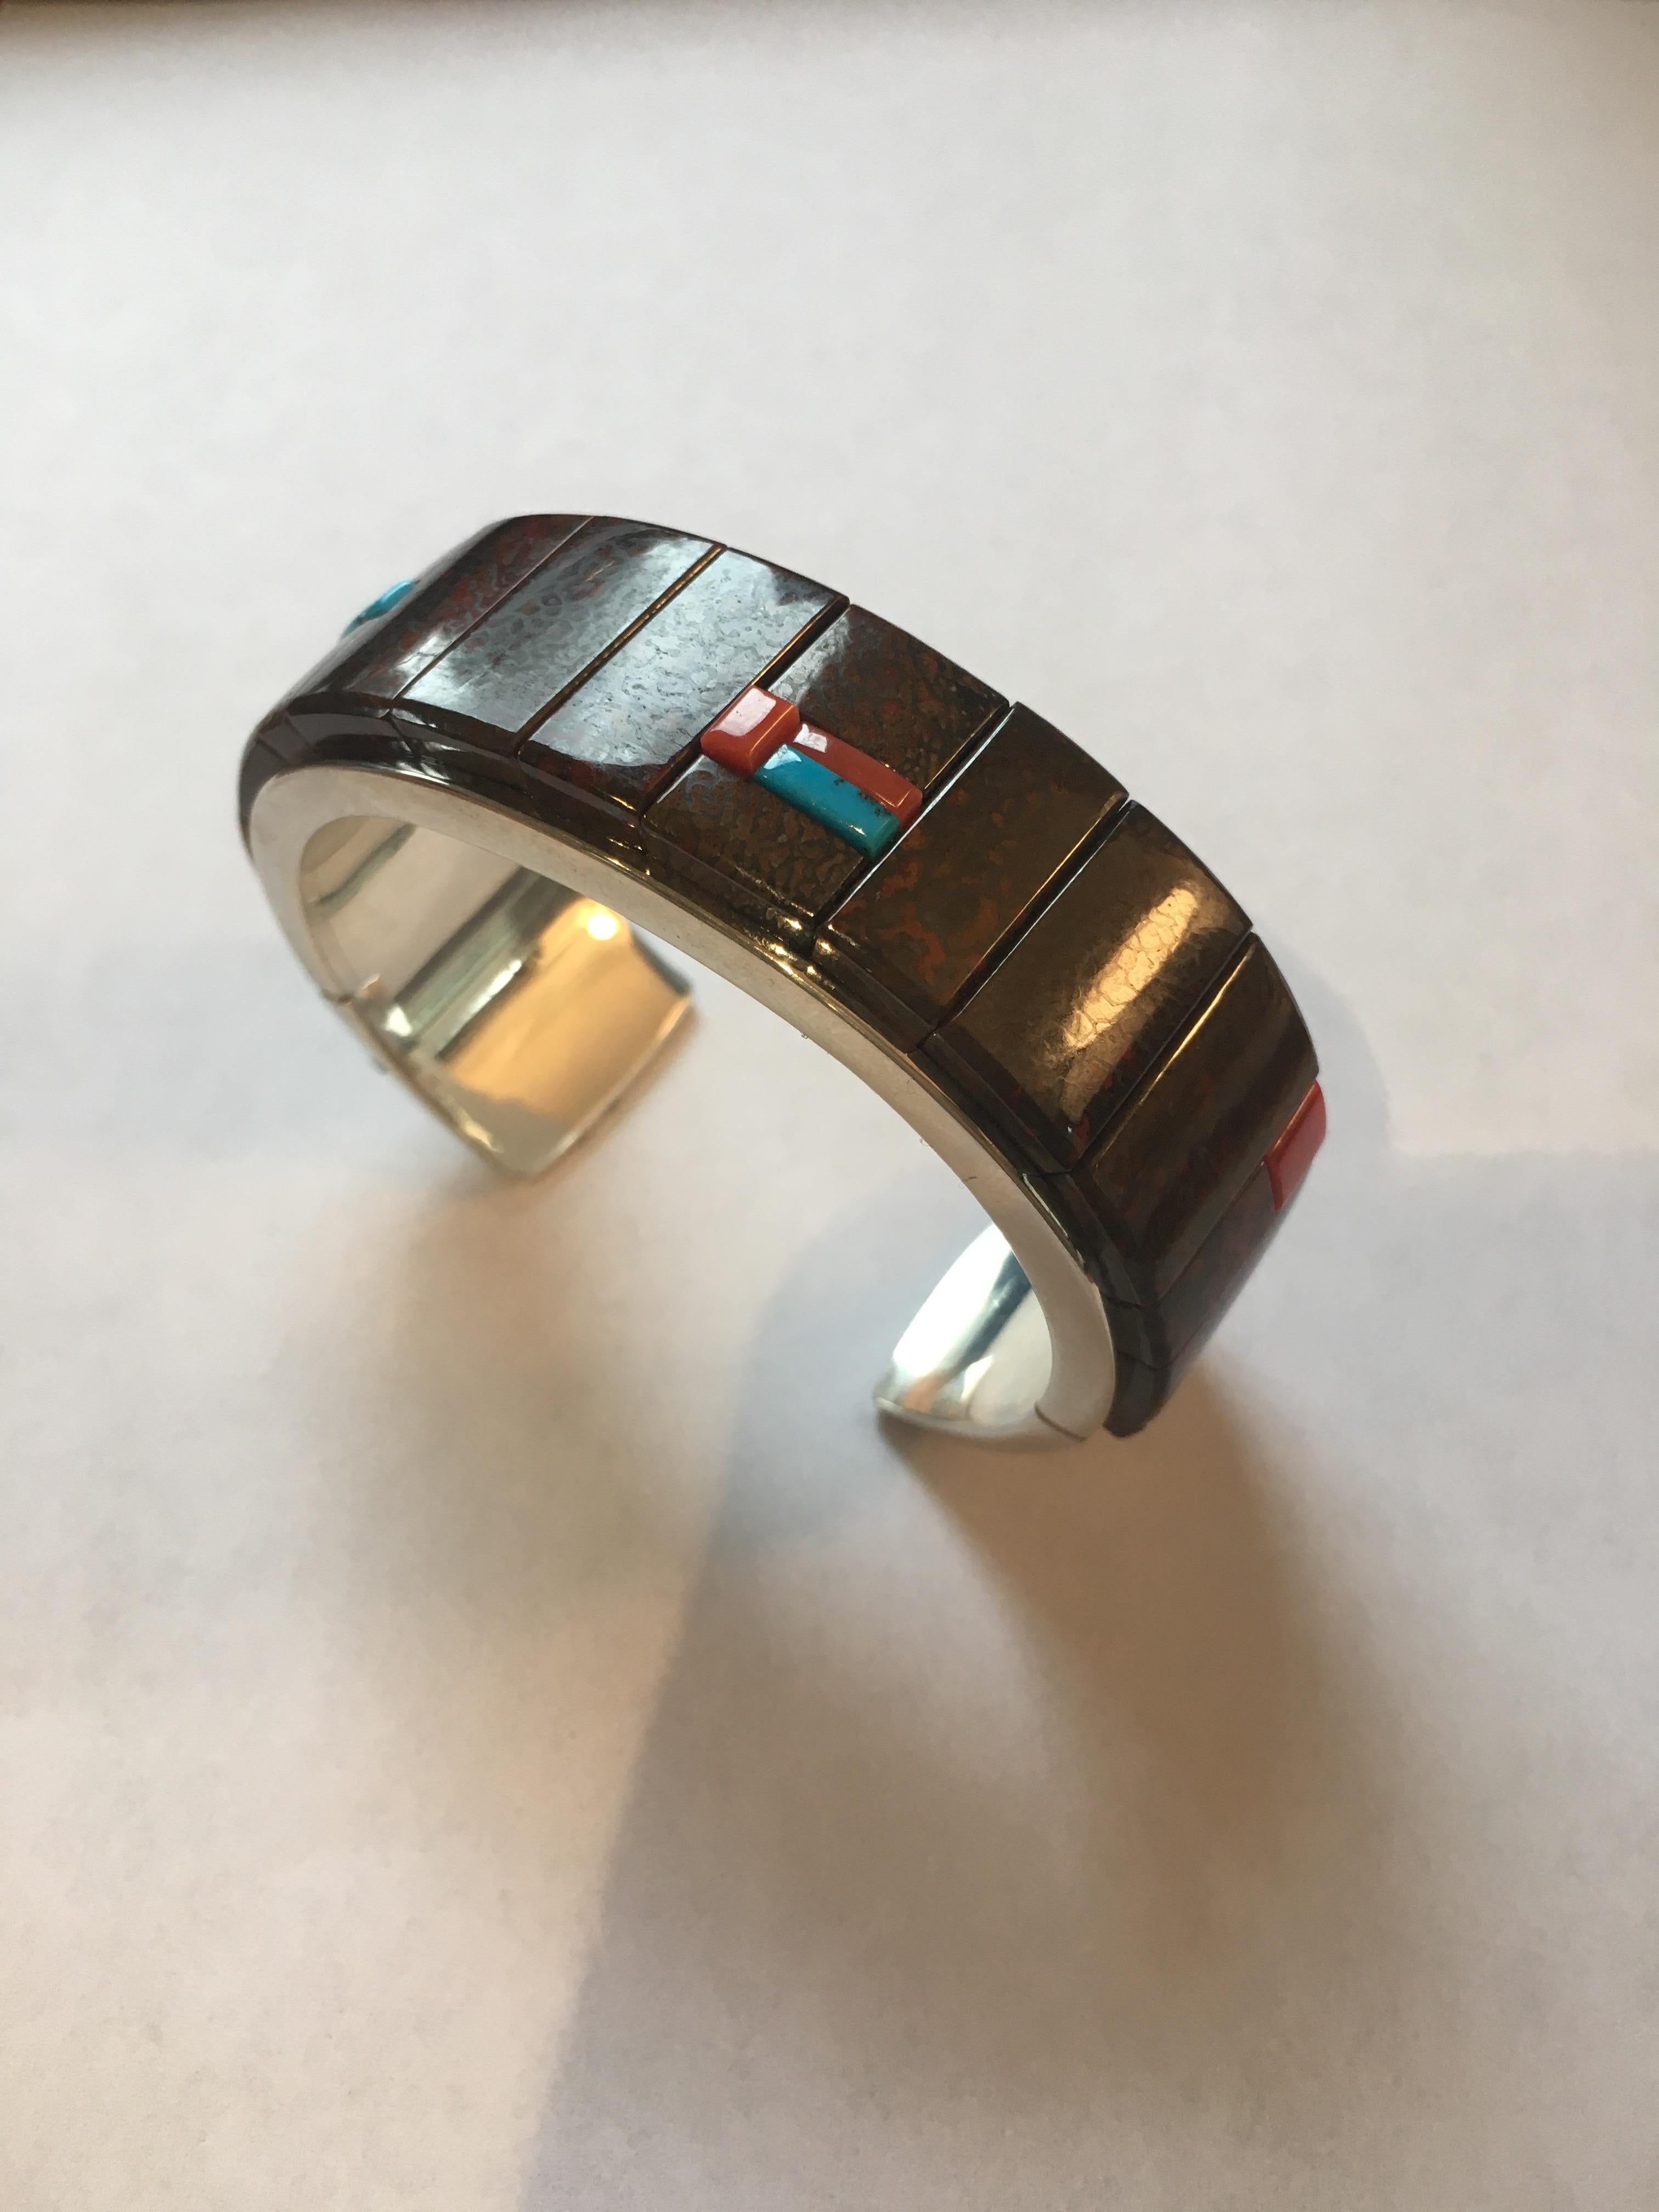 A fossilized dinosaur bone, coral, turquoise and sterling silver cuff, by Richard Chavez (San Felipe Pueblo), 2016. Stamped with maker's mark, 925. 
This cuff is 0.80